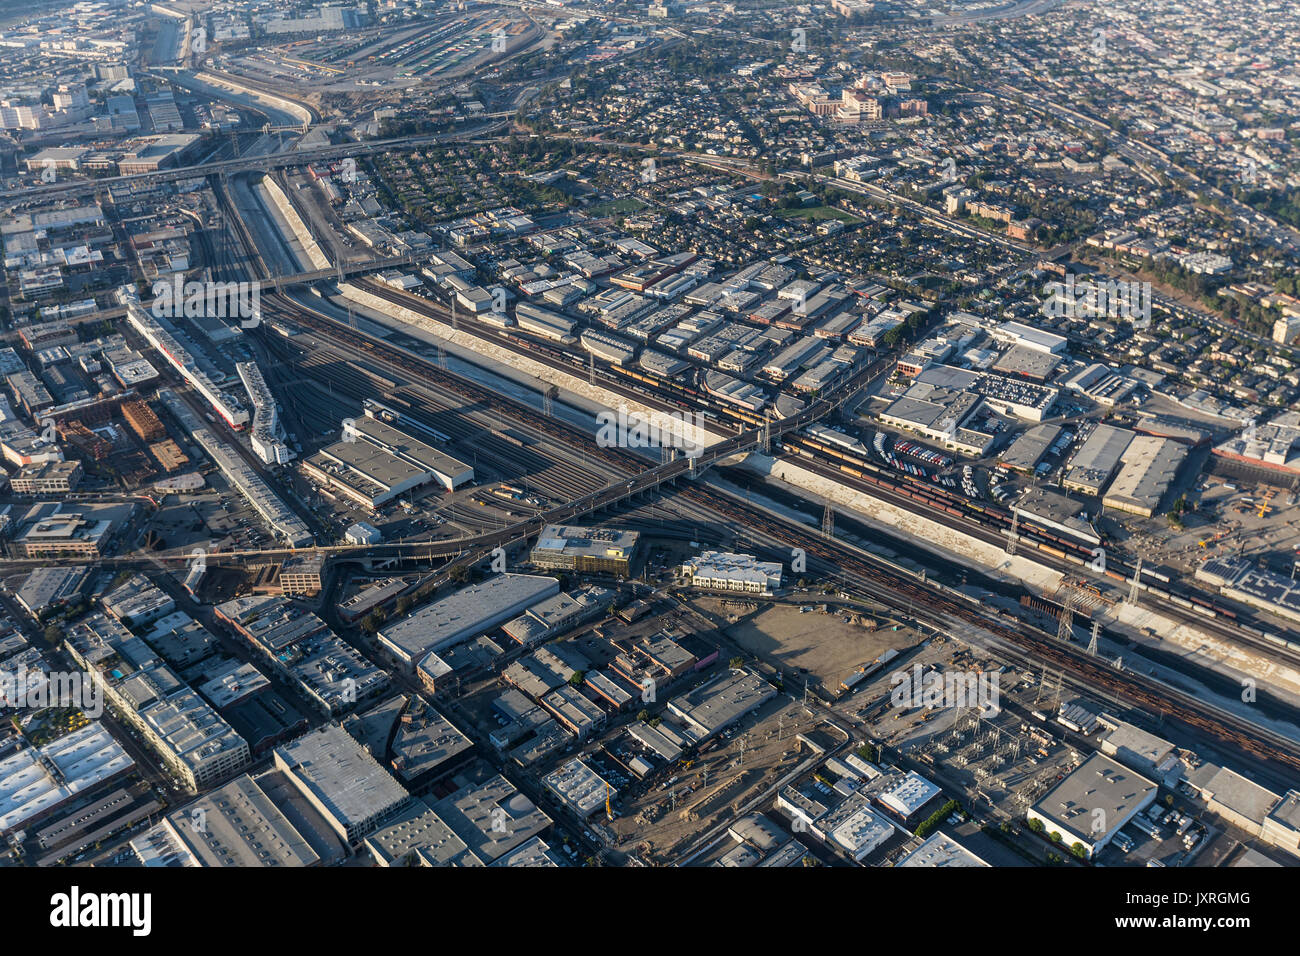 Aerial view of the Los Angeles River, downtown Arts District and Boyle Heights in Southern California. Stock Photo